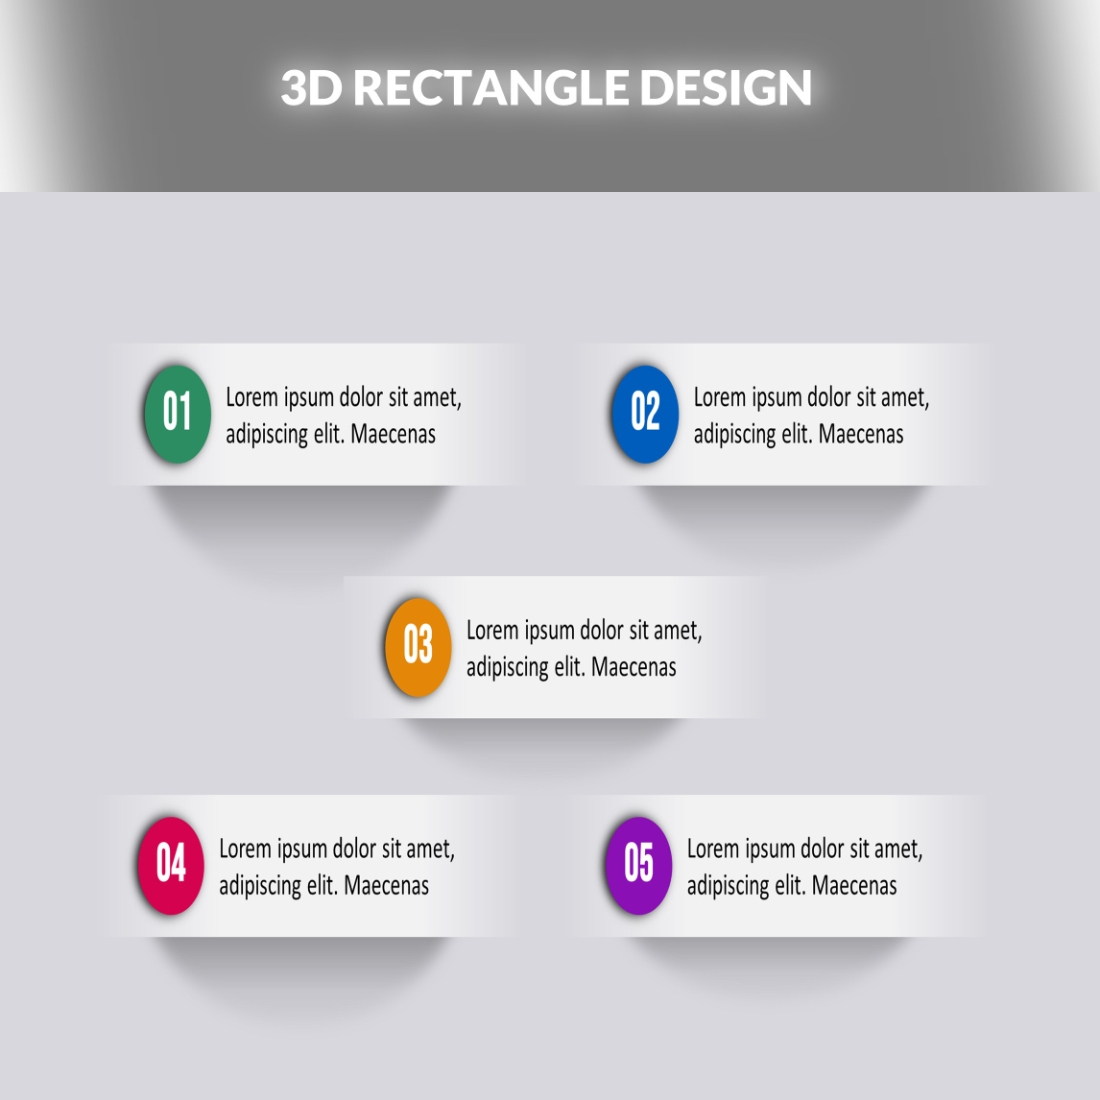 Creative 3D WALL DESIGN RENTANGLE Illustration 3D RECTANGLE cover image.